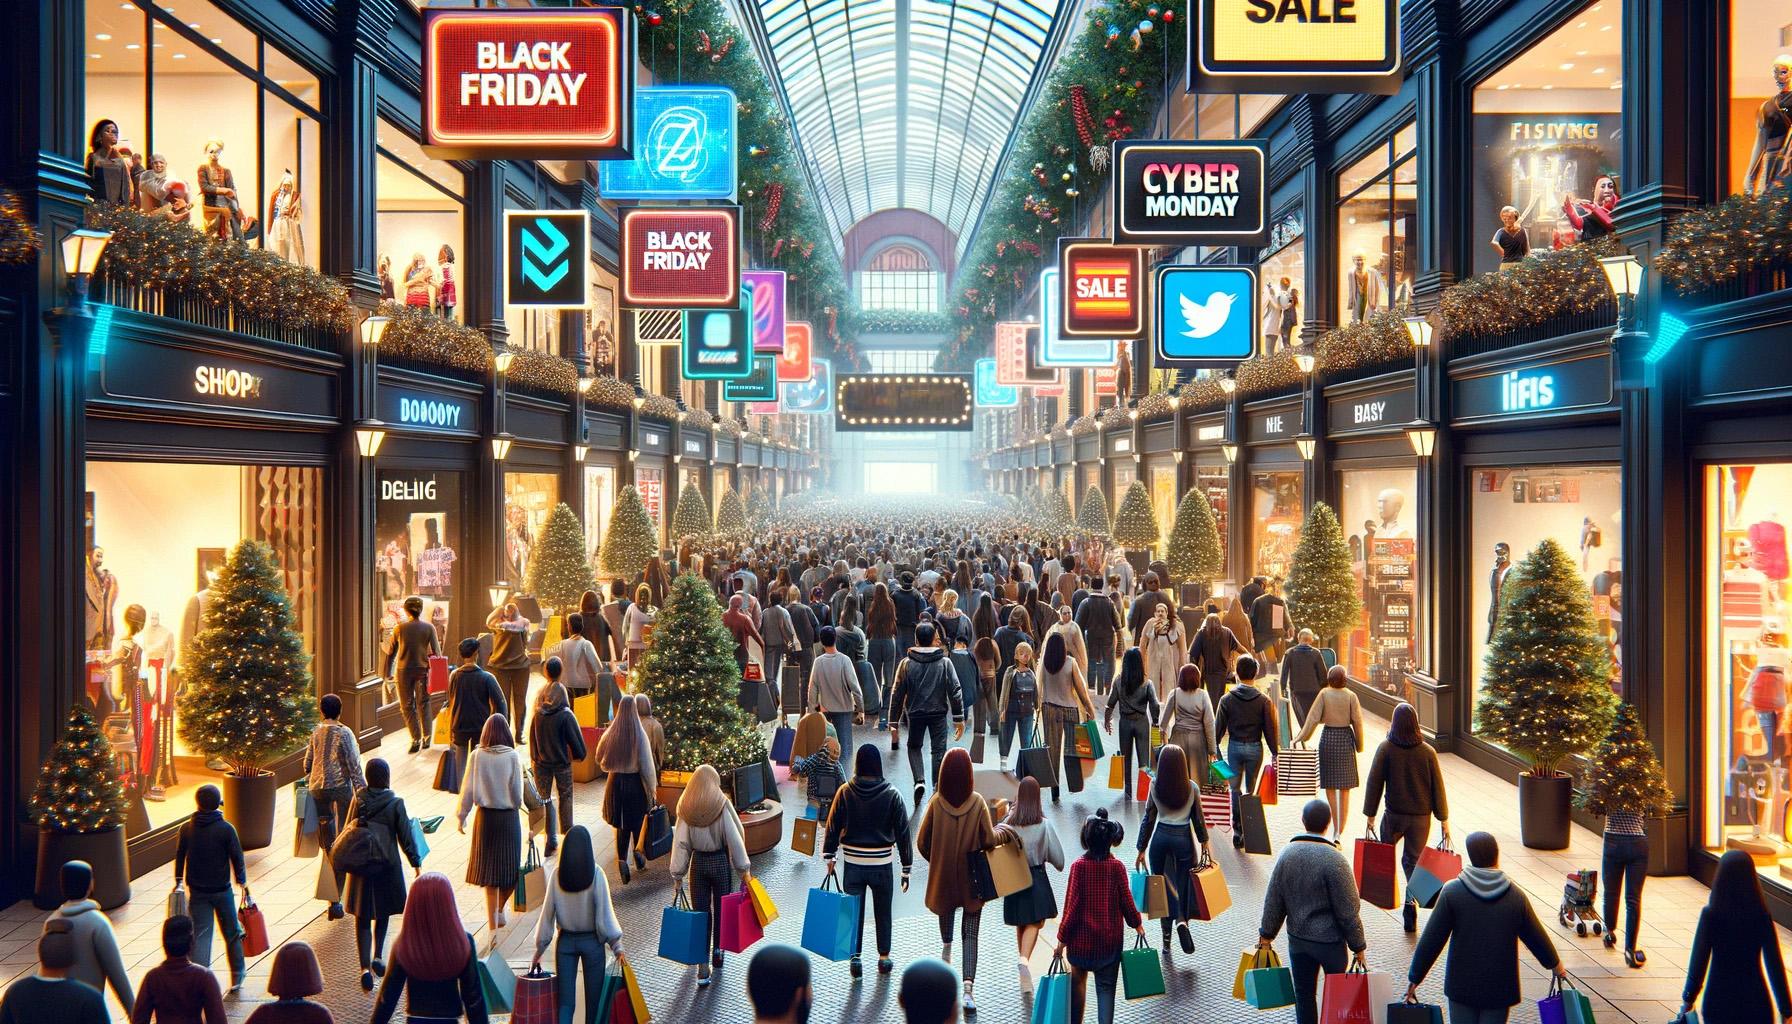 Cyber Monday and Black Friday Shopping news graphic